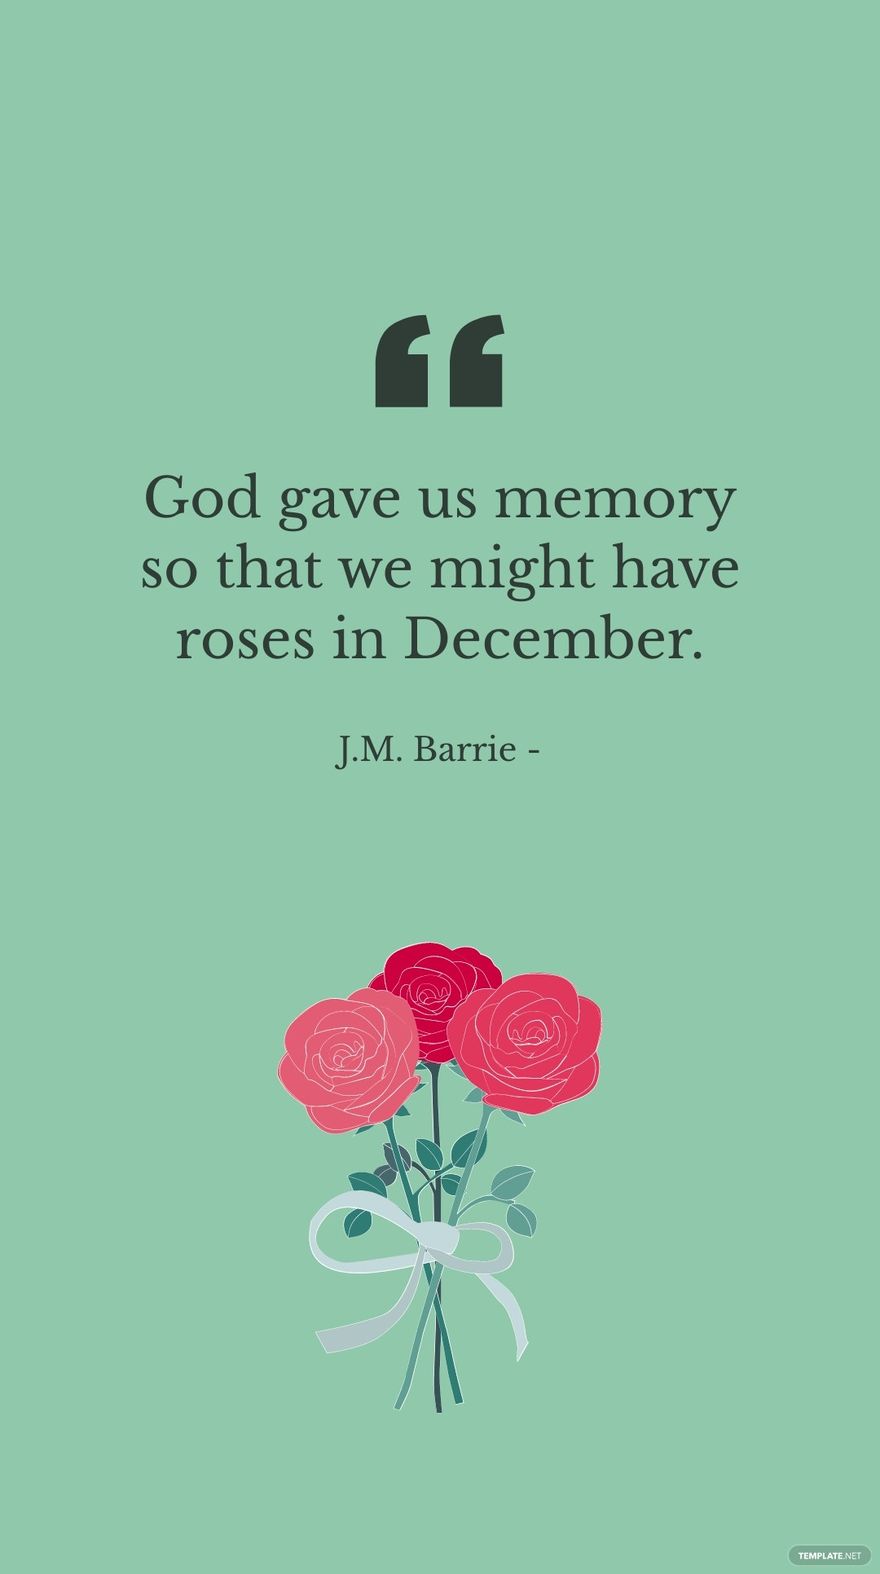 Free J.M. Barrie - God gave us memory so that we might have roses in December. in JPG